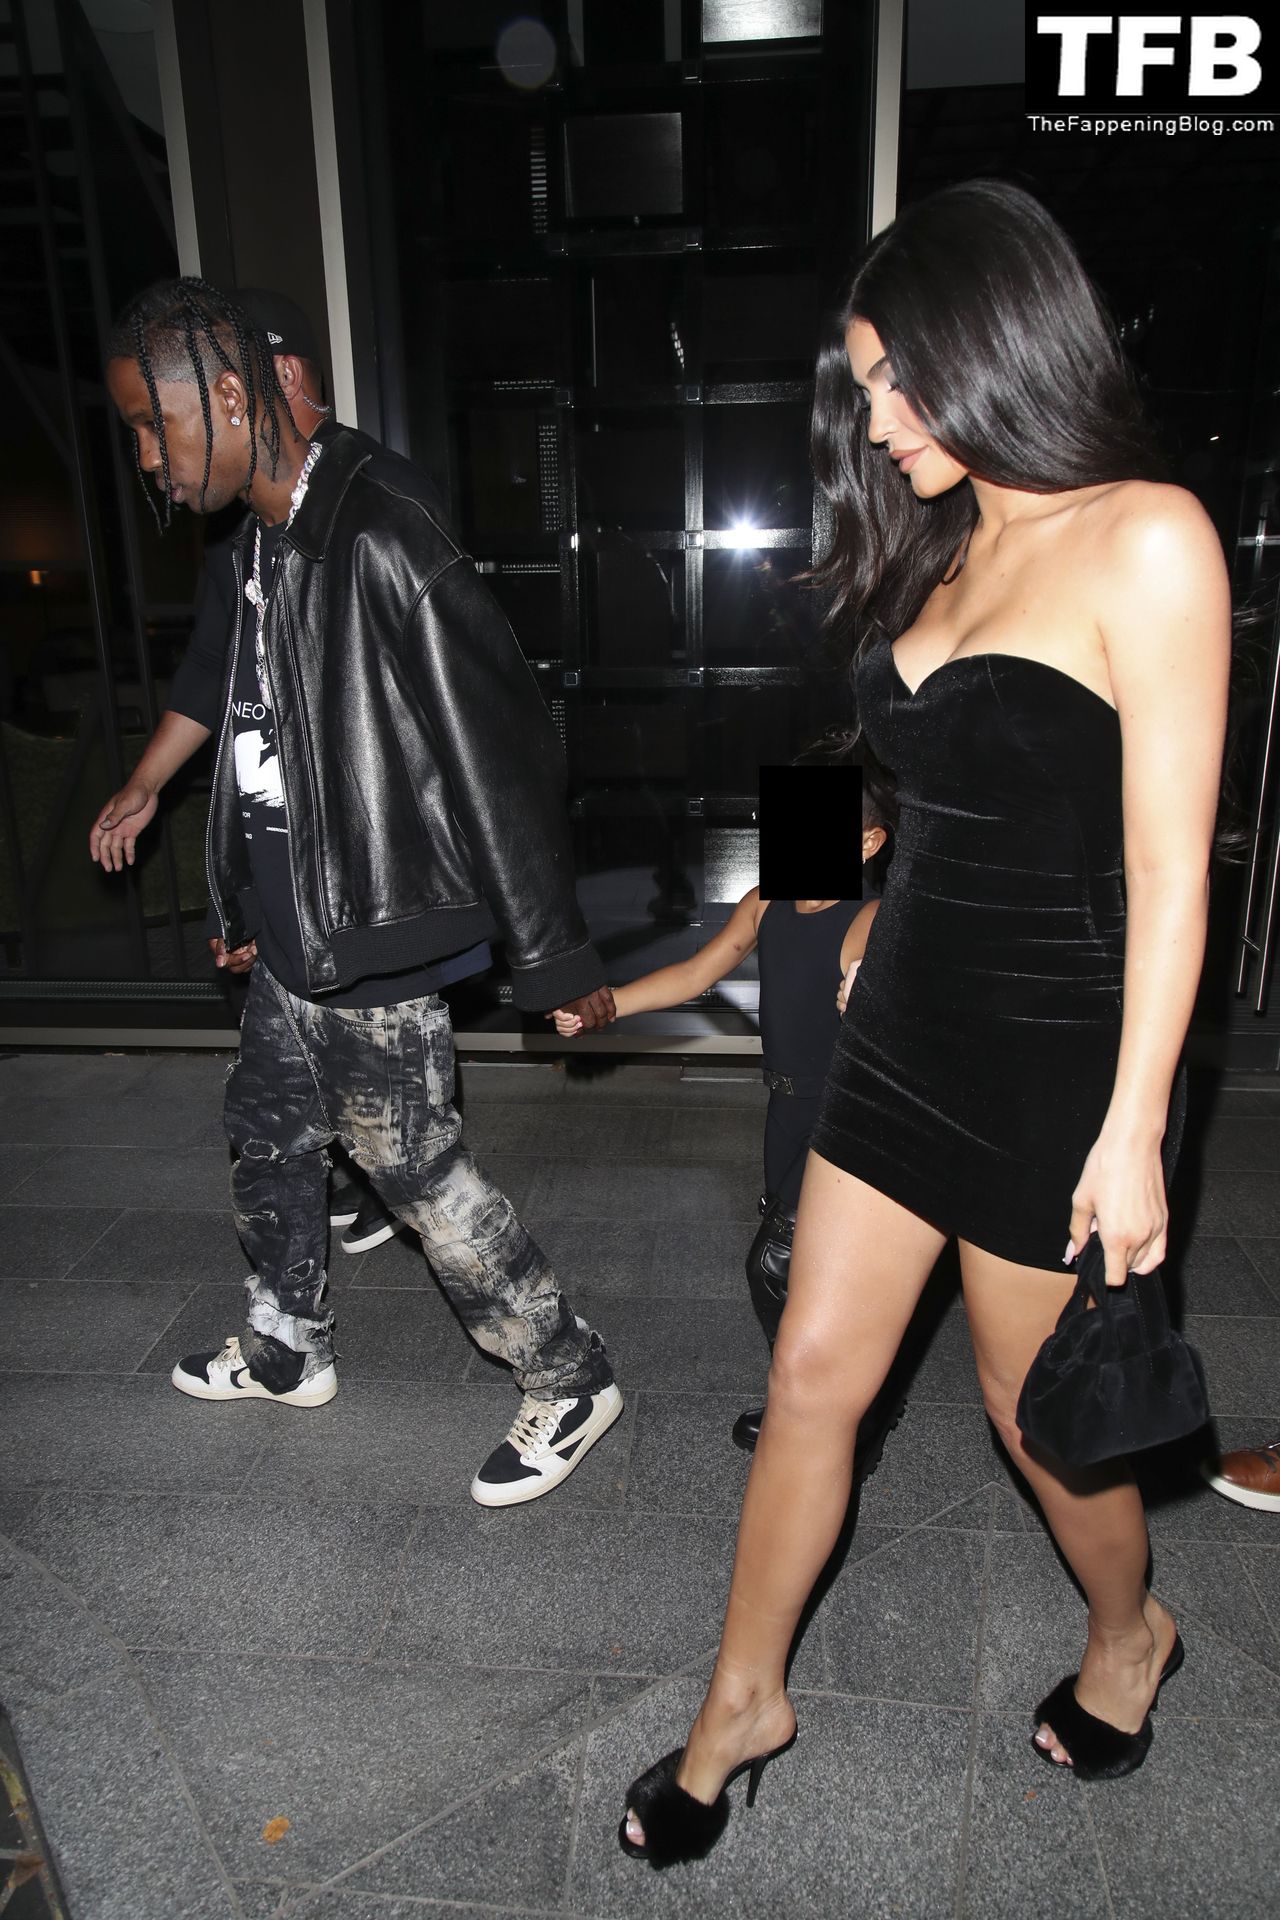 Kylie Jenner Sexy The Fappening Blog 22 - Kylie Jenner Steps Out For Dinner at Nobu London (26 Photos)